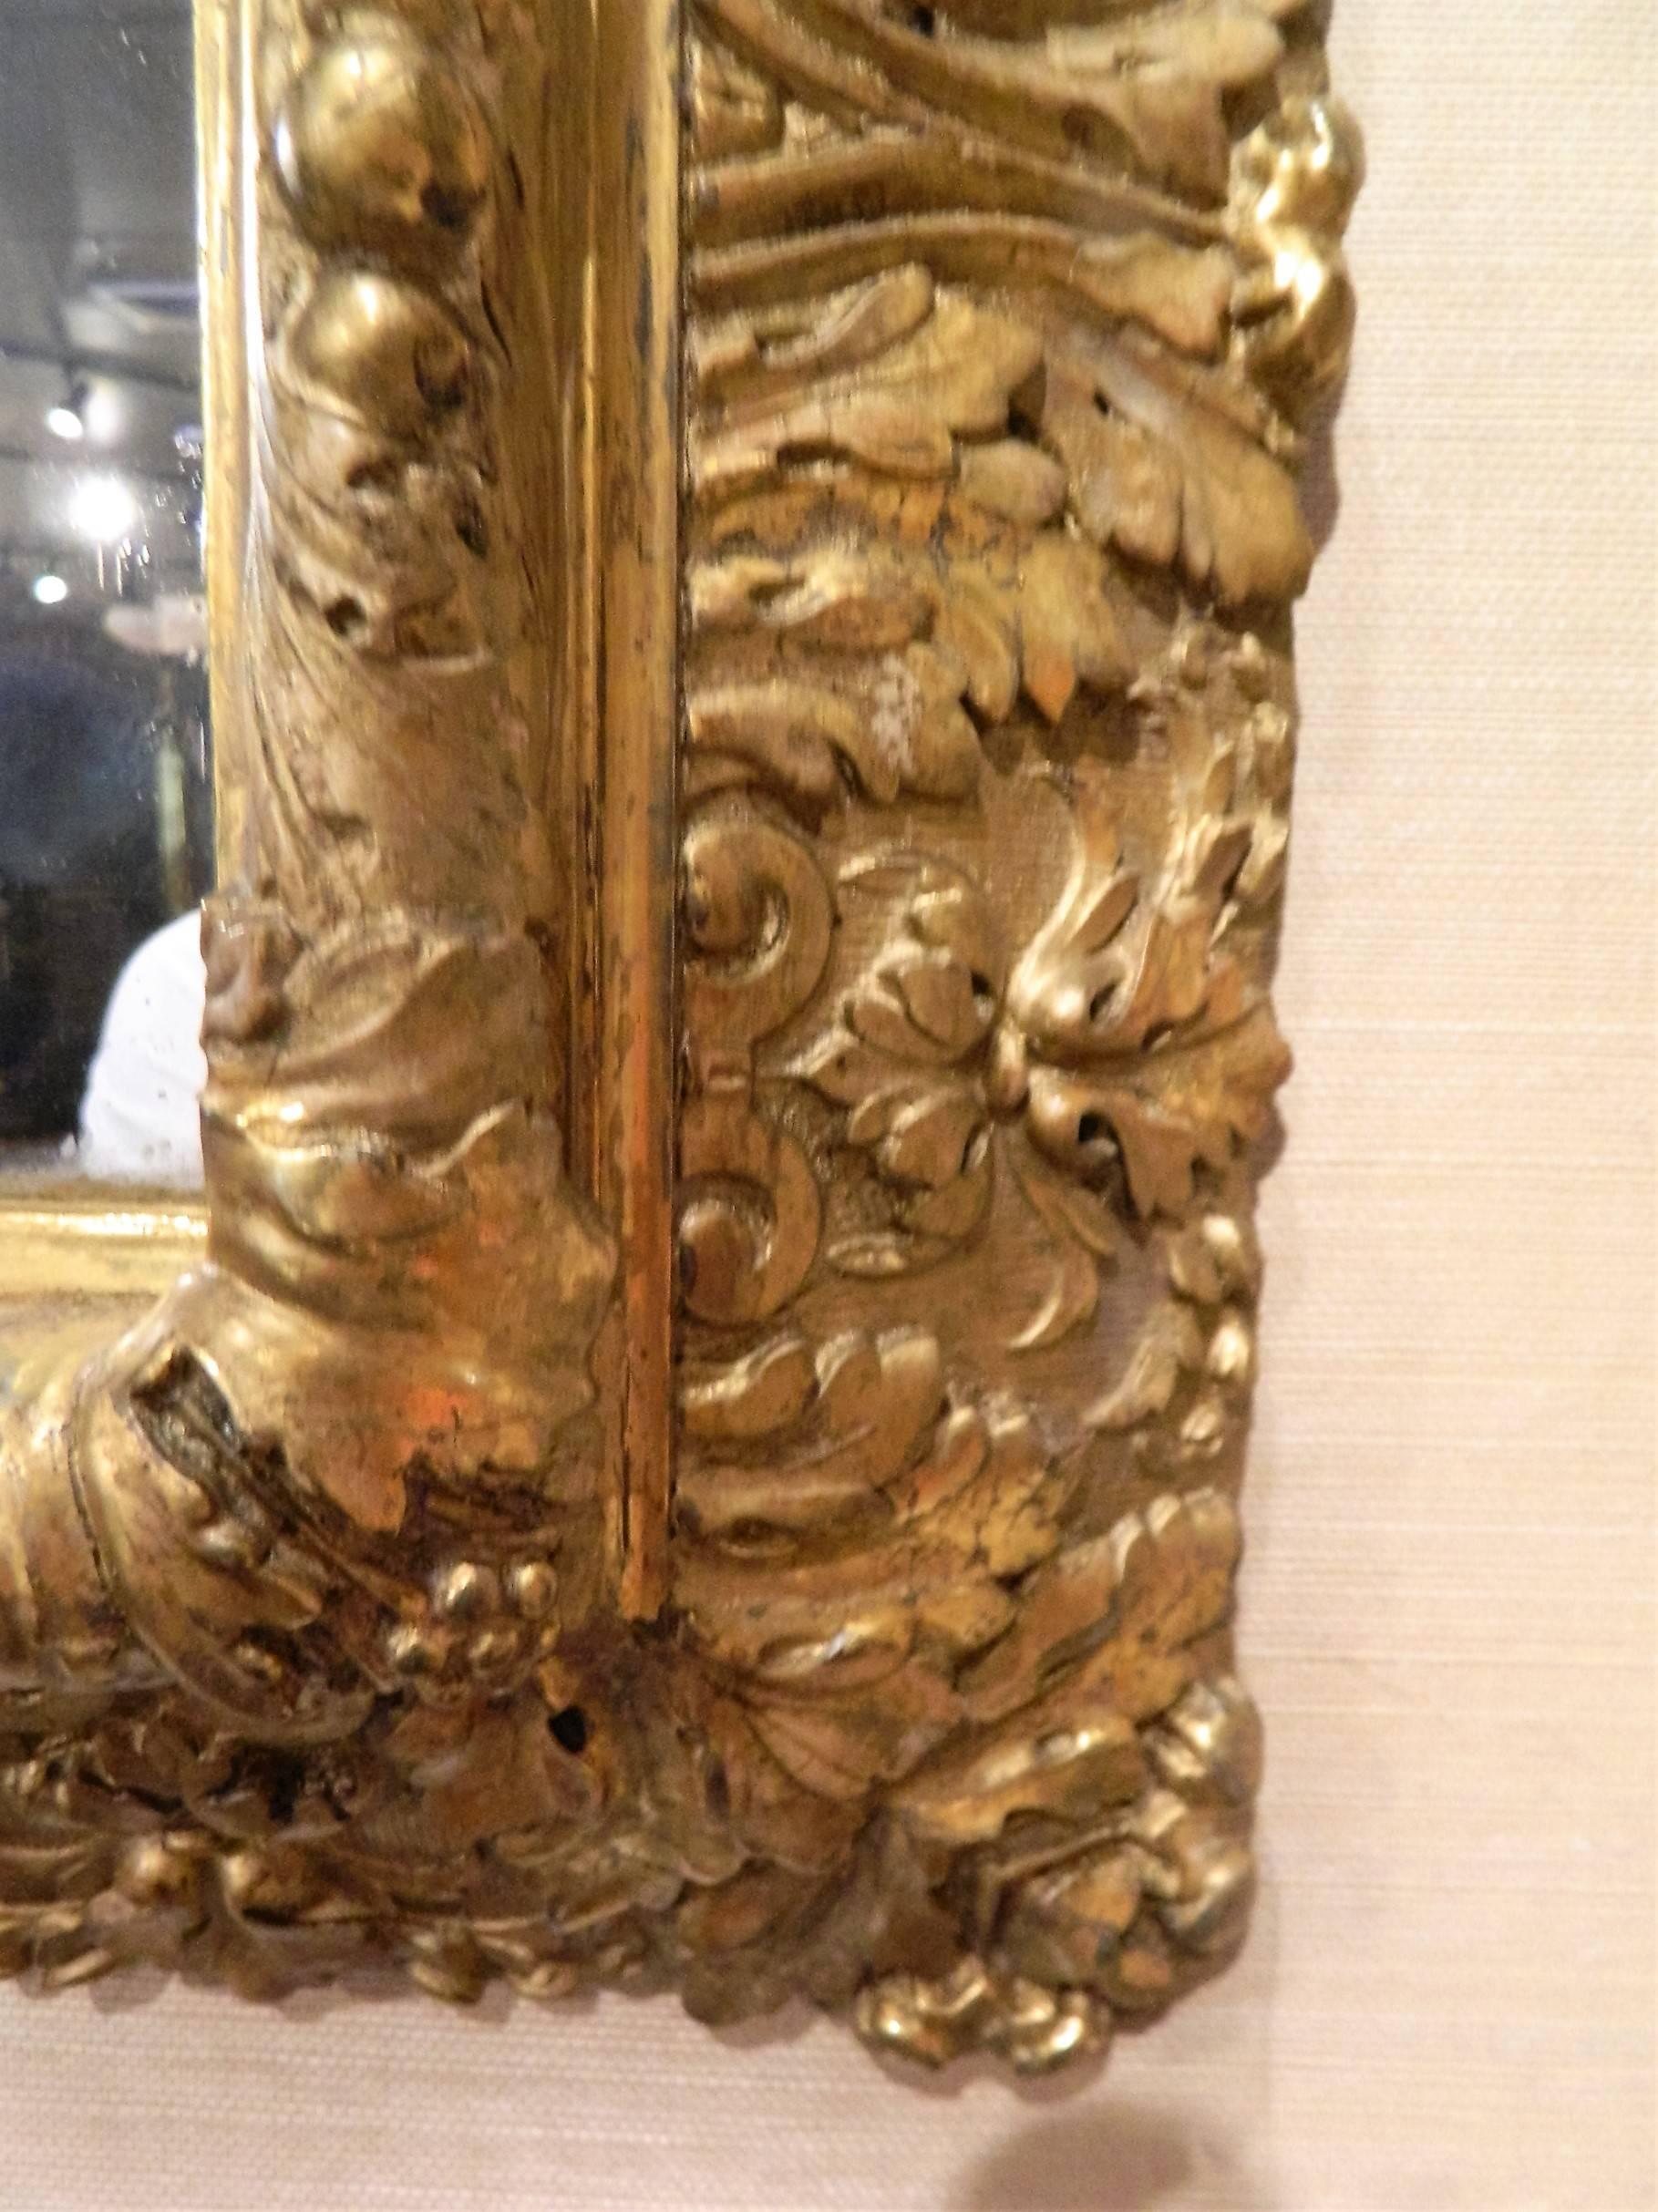 English gold leaf and water gilding trim mirror with floral bouquet motif decoration, circa 1850-1880.
      